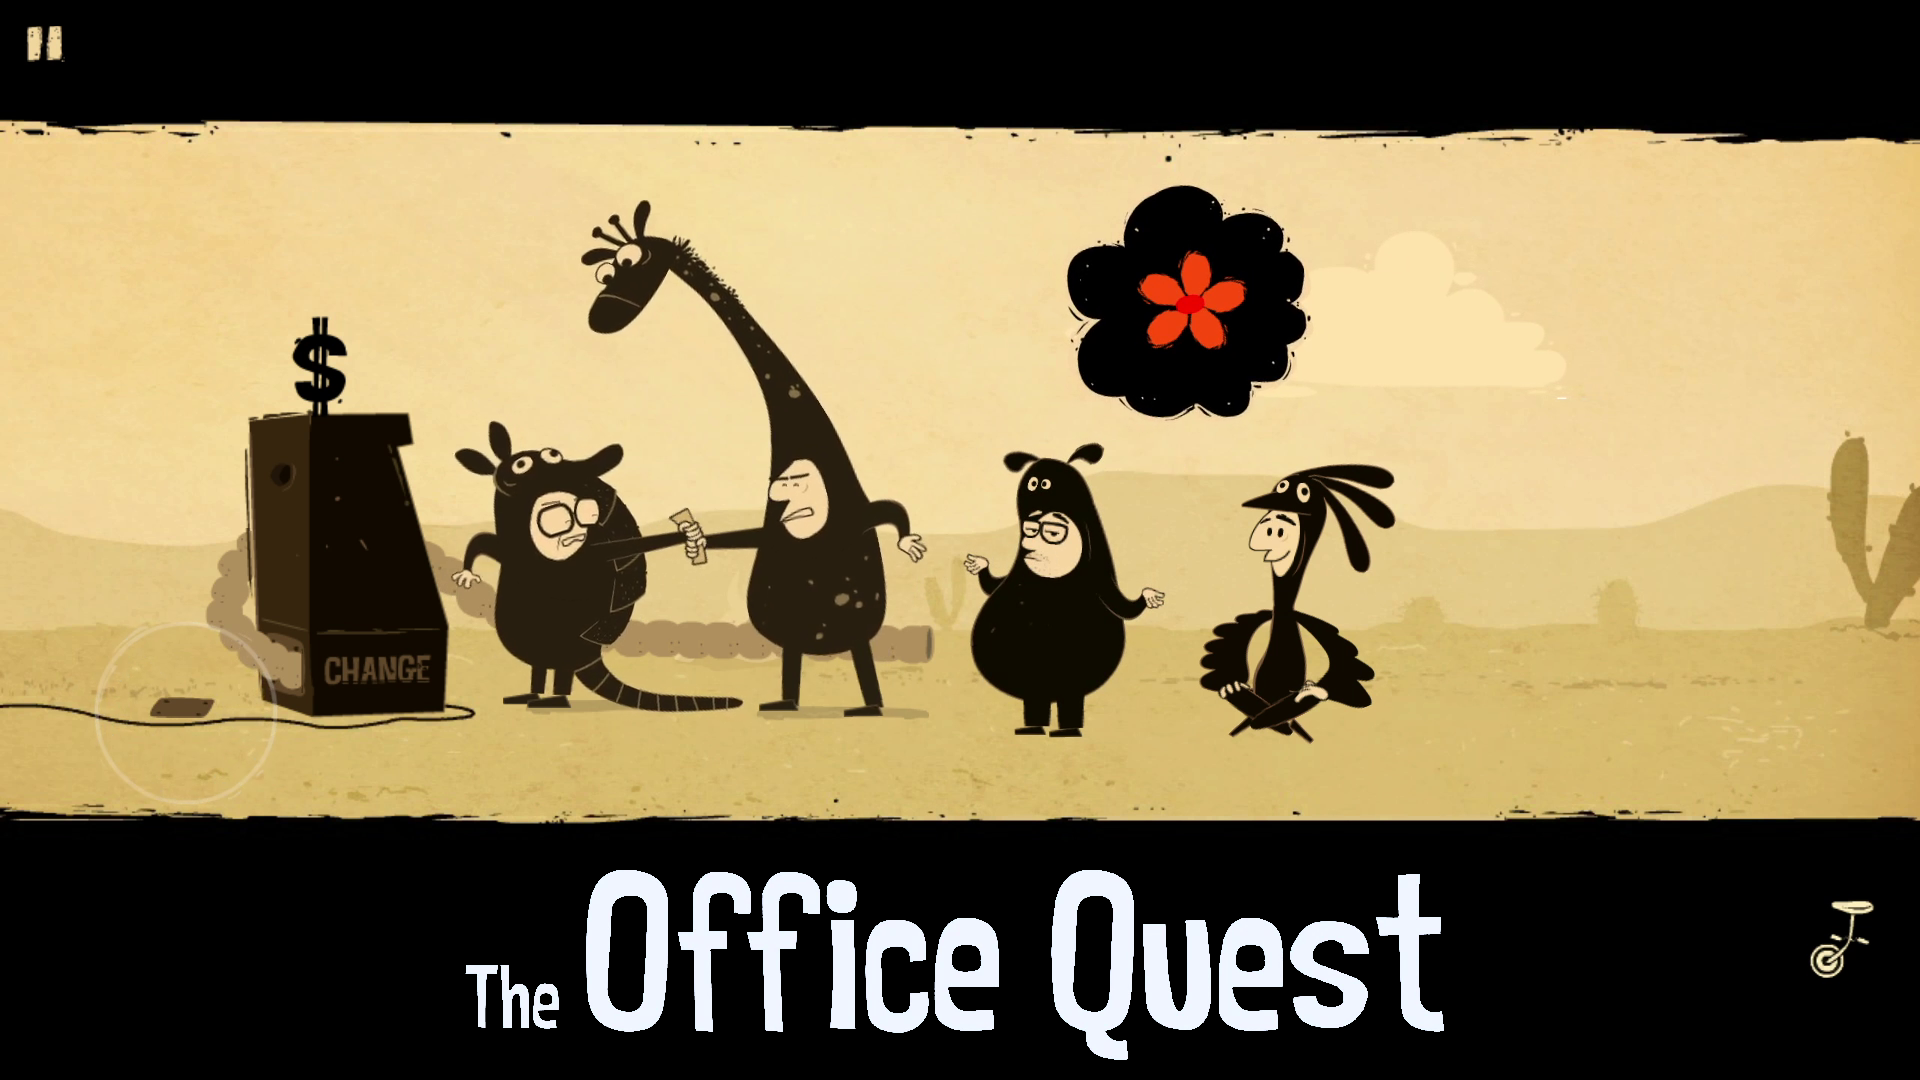 There’s Two of Them Now? – Let’s Play The Office Quest Episode 4